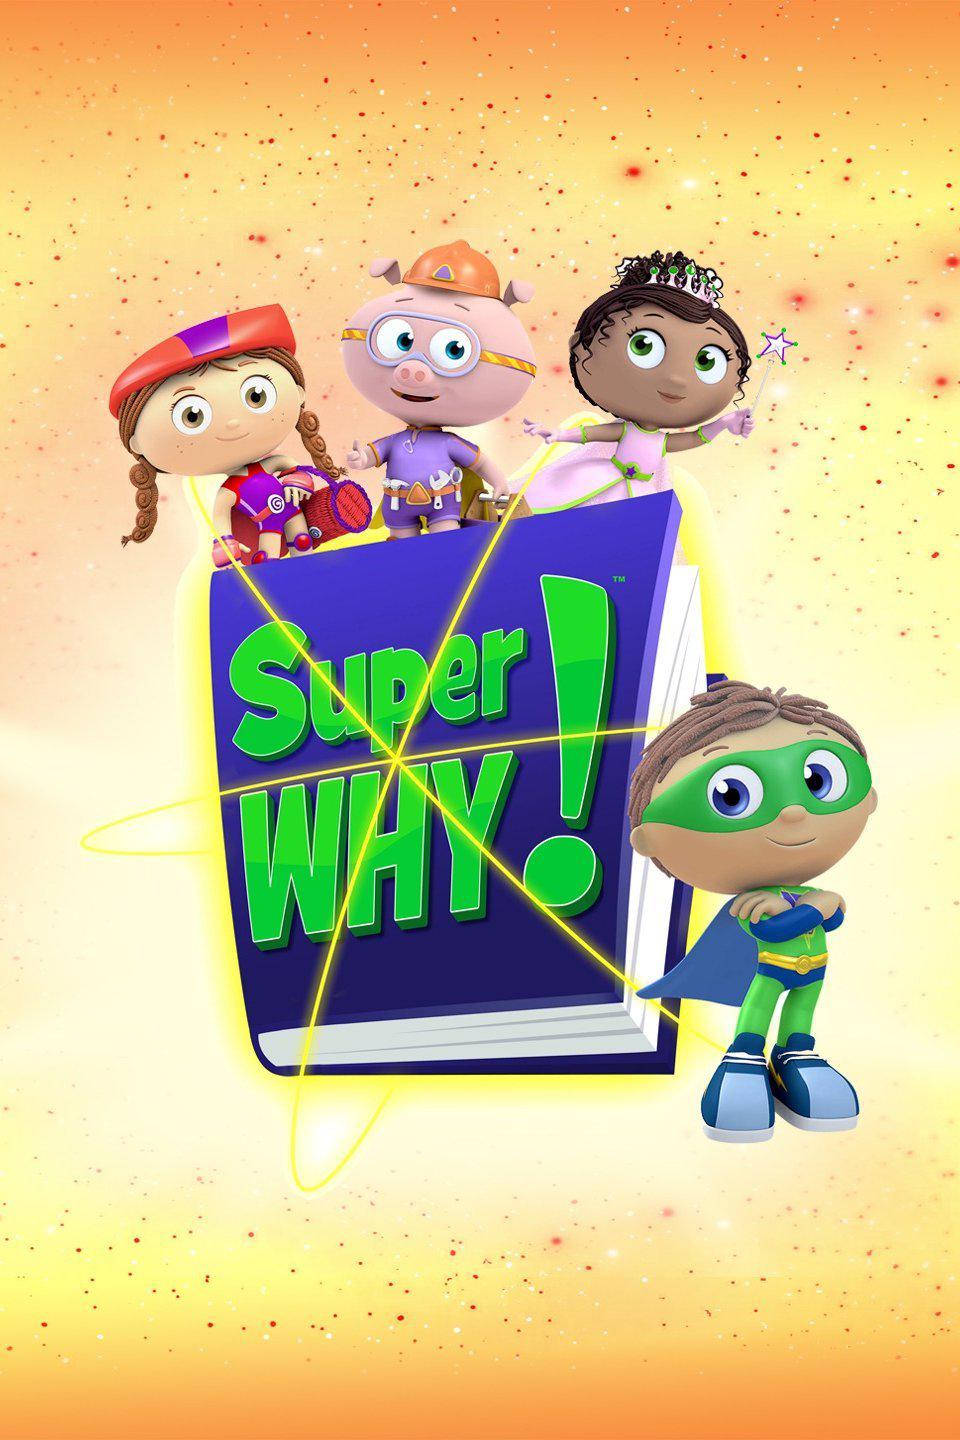 Super Why! (PBS): United States daily TV audience insights for smarter  content decisions - Parrot Analytics